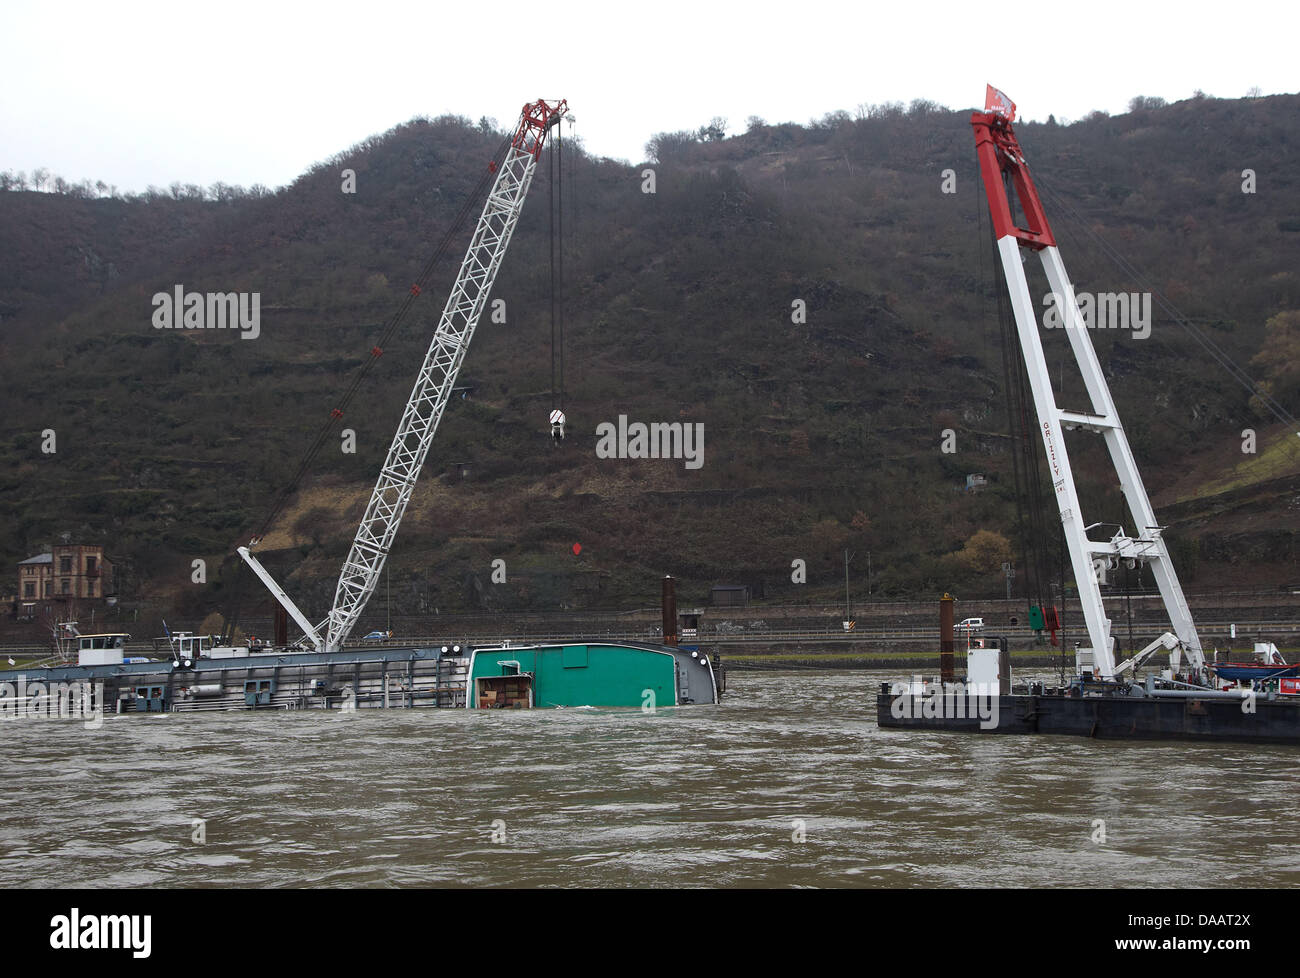 A second ship with crane takes it's position on the rhine at the accident site nearby St Goarshausen, Germany, 23 January 2011. Here, a tanker with sulphuric acid has sunk. The Havarist will first be secured with more steel cables. The complete salvage will take about 3 weeks. Photo: Thomas Frey Stock Photo